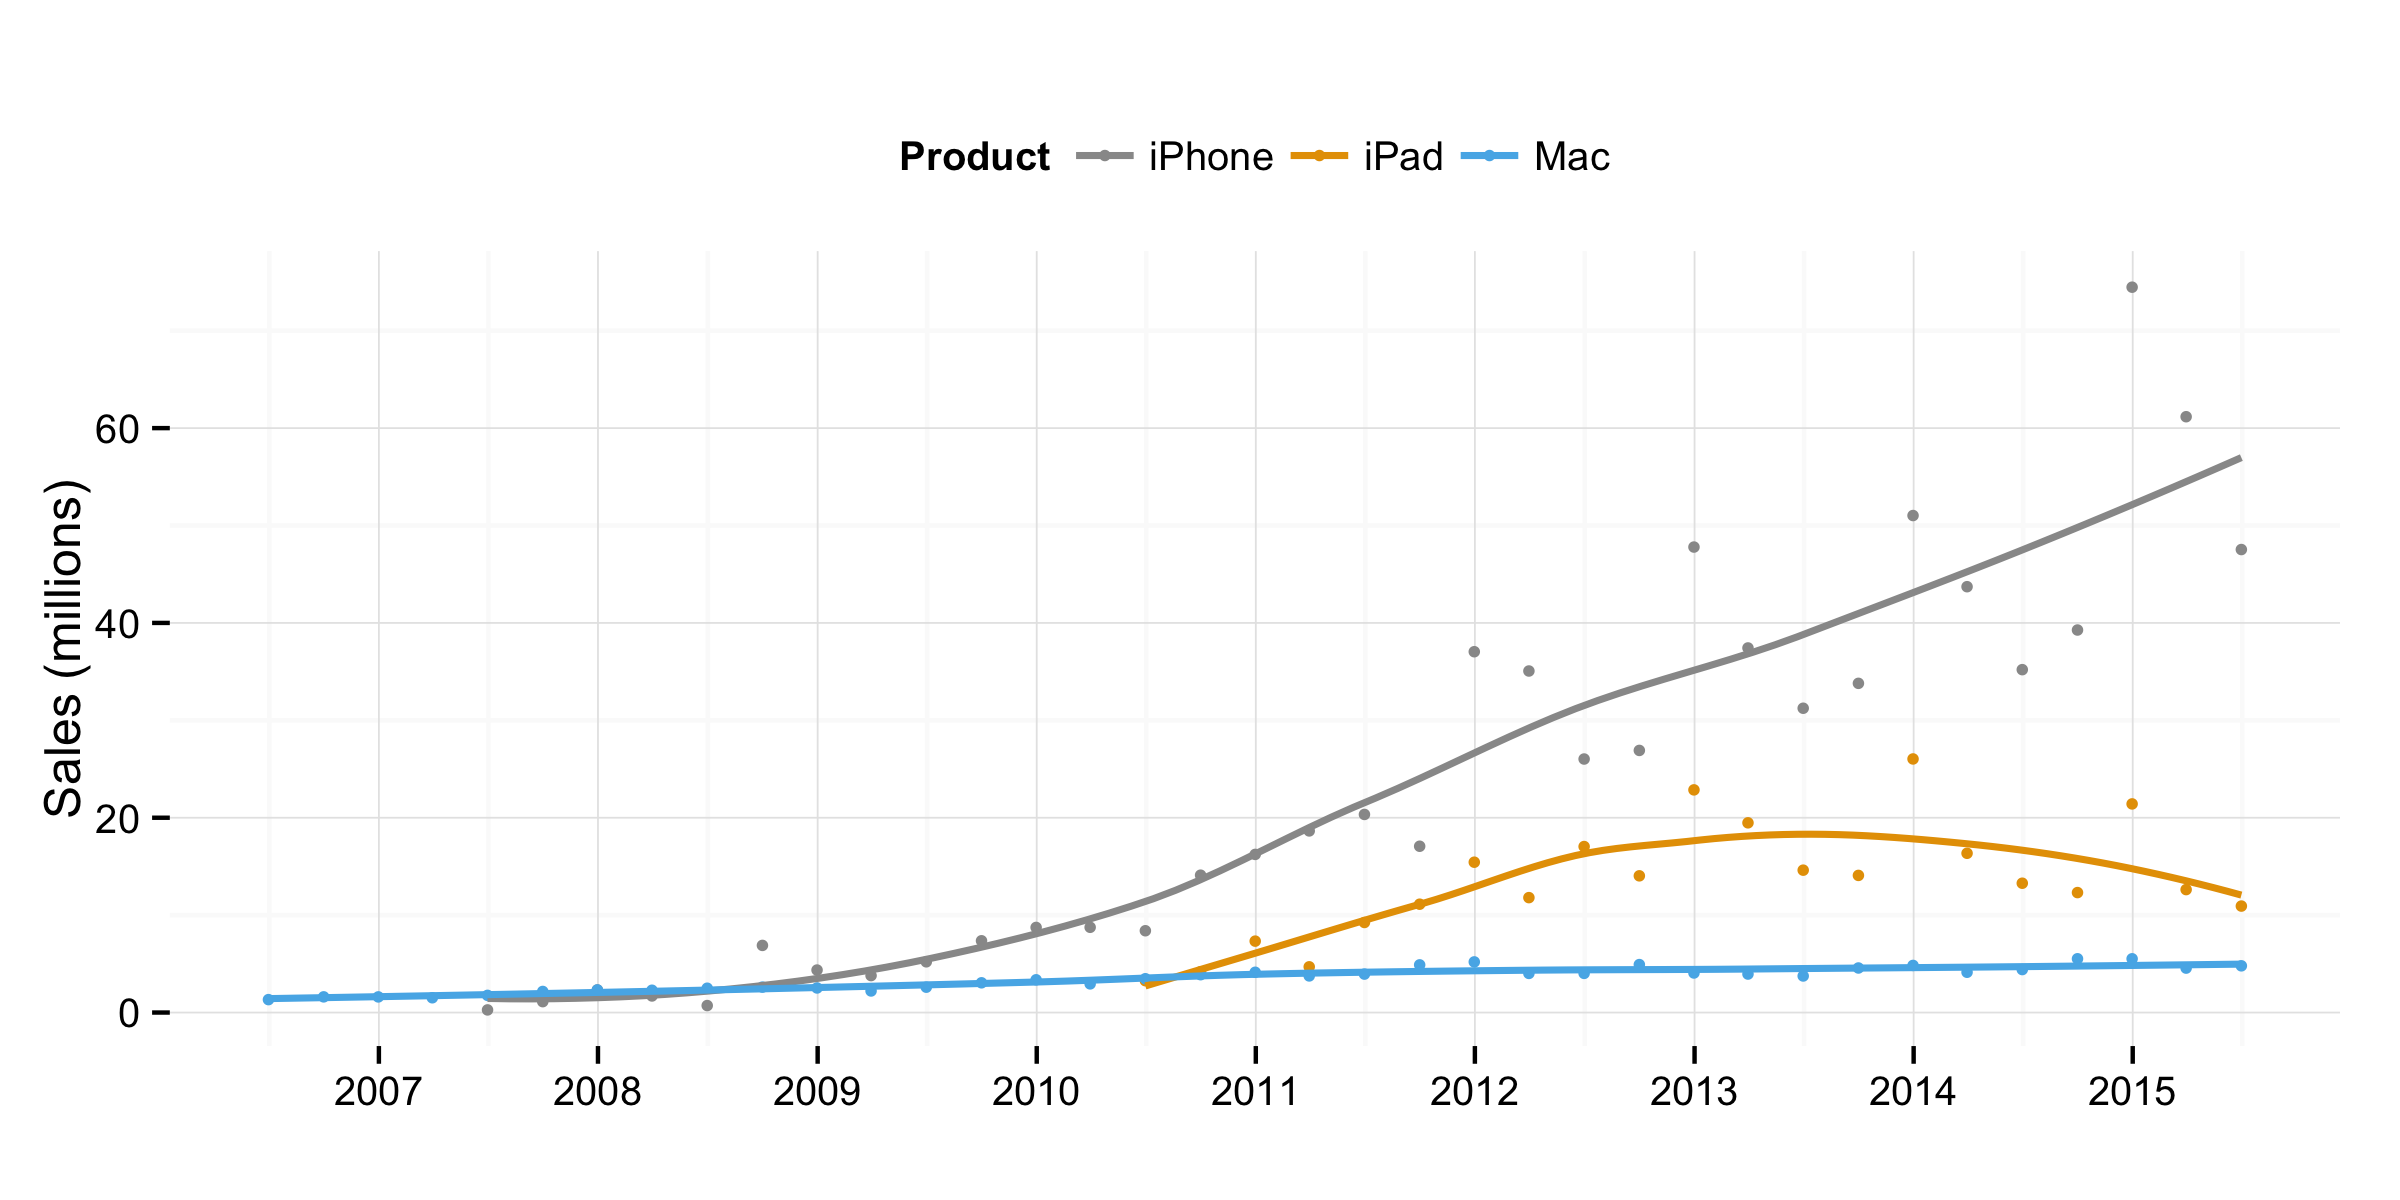 Sales trends for Apple products.